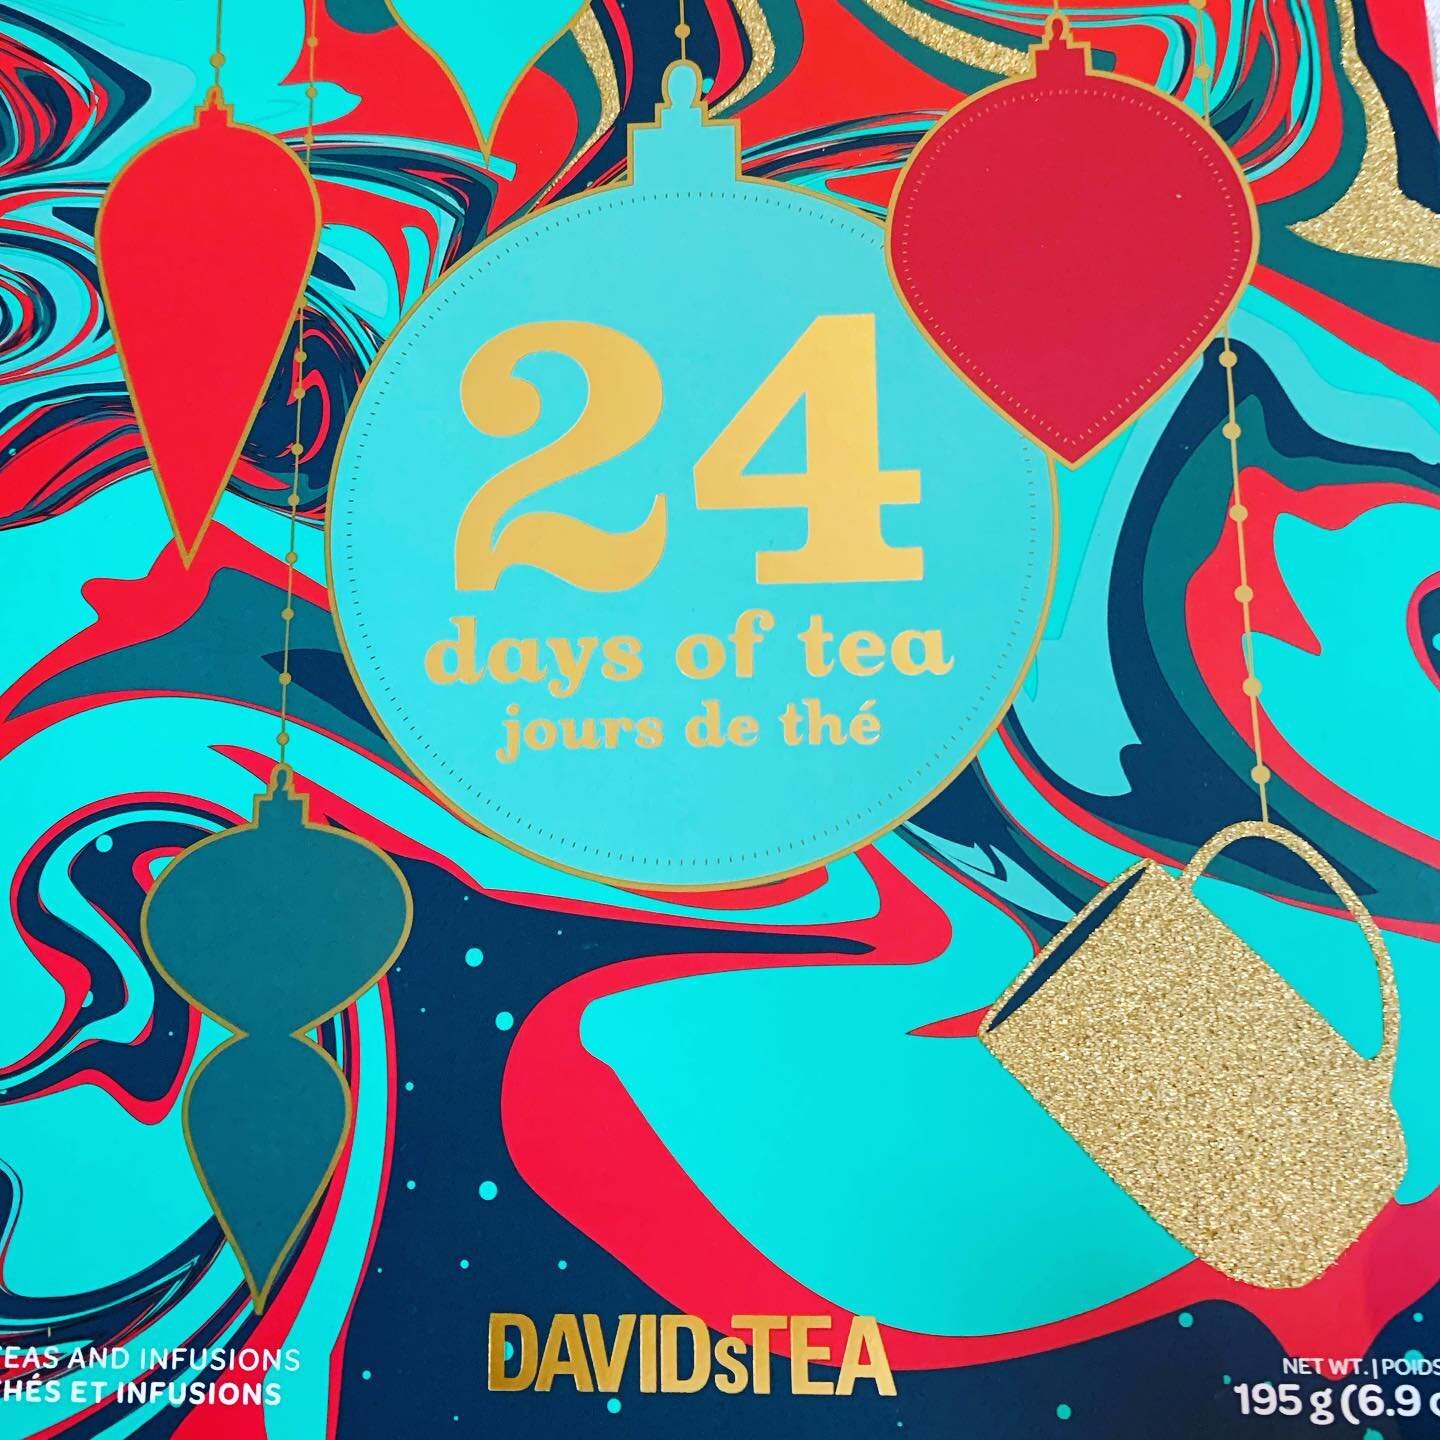 December 1st means advent calendar time! Today I get to start @davidstea 24 days of tea, an early Xmas gift from @rehab_dan Let&rsquo;s hope it doesn&rsquo;t disappoint!

.
.
.
#teatime #tea #tealover #teaparty #love #teaaddict #tealovers #christmas 